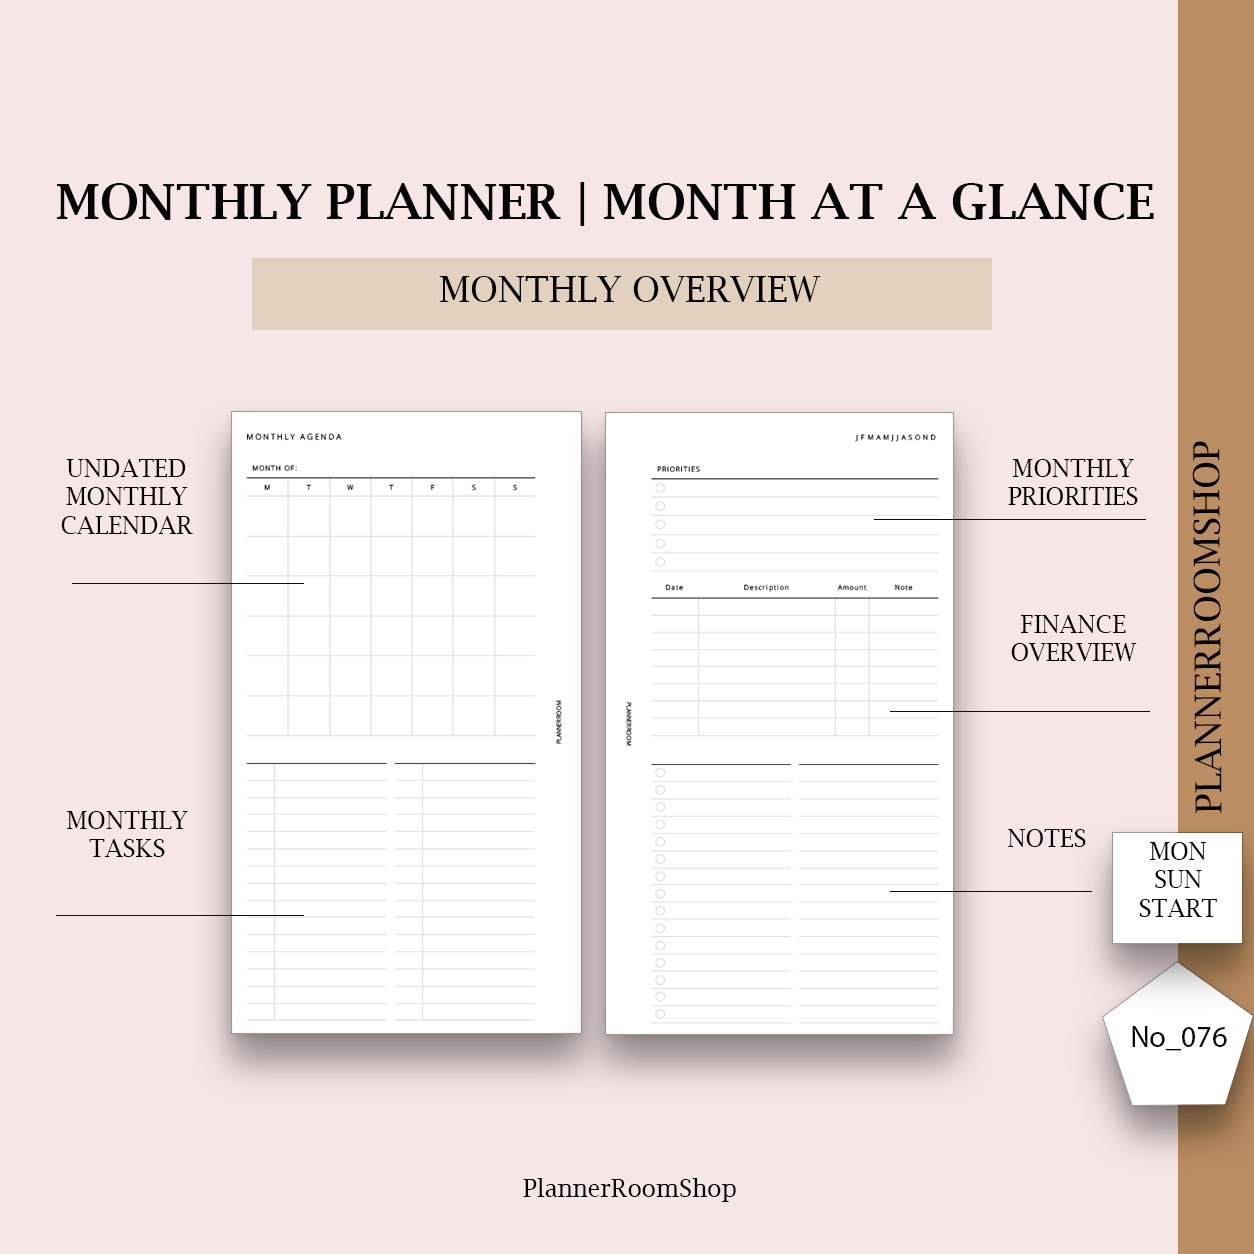 Monthly planner | Printable inserts - 076